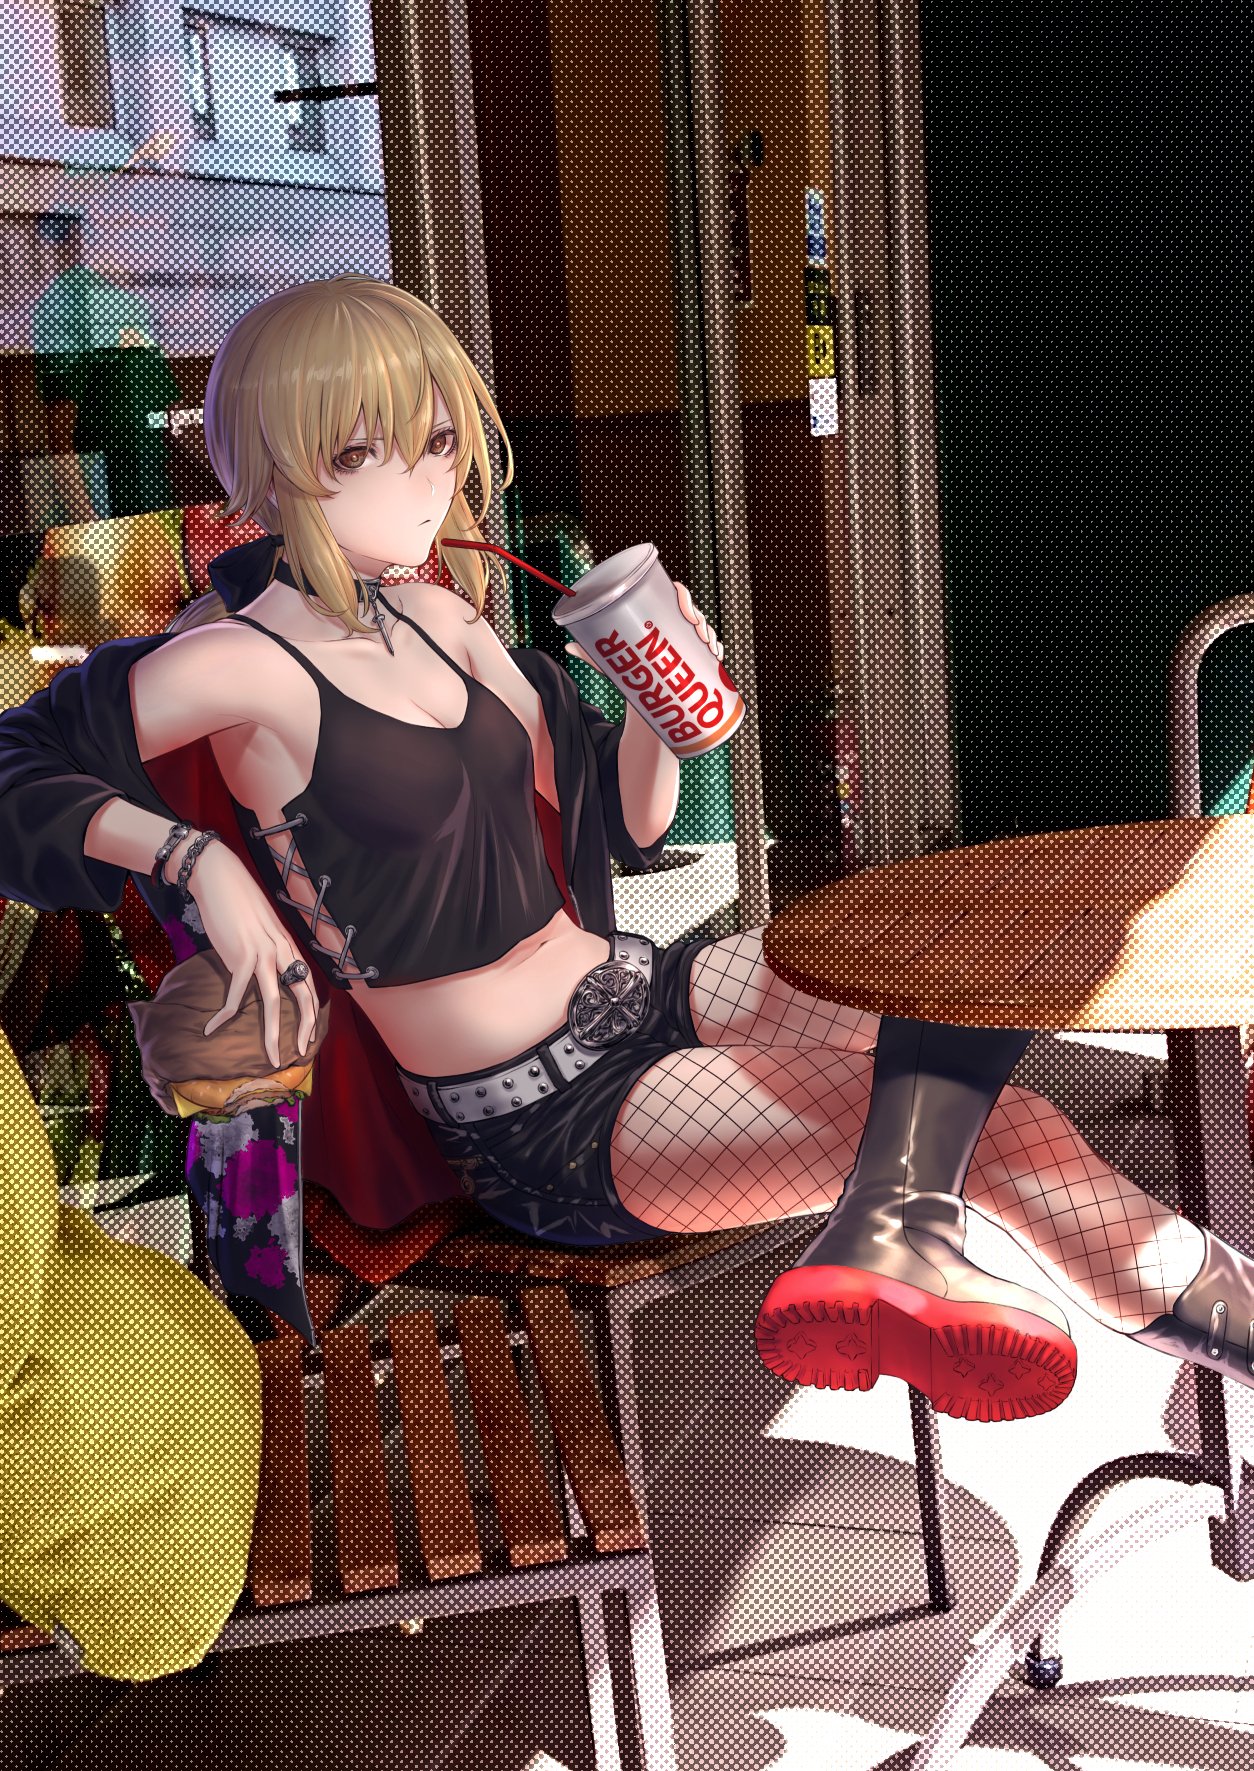 Anime 1254x1771 Fate series Fate/Stay Night Saber Alter Fate/Grand Order Artoria Pendragon anime girls Mugetsu Illust blonde brown eyes crop top cleavage short shorts fishnet pantyhose